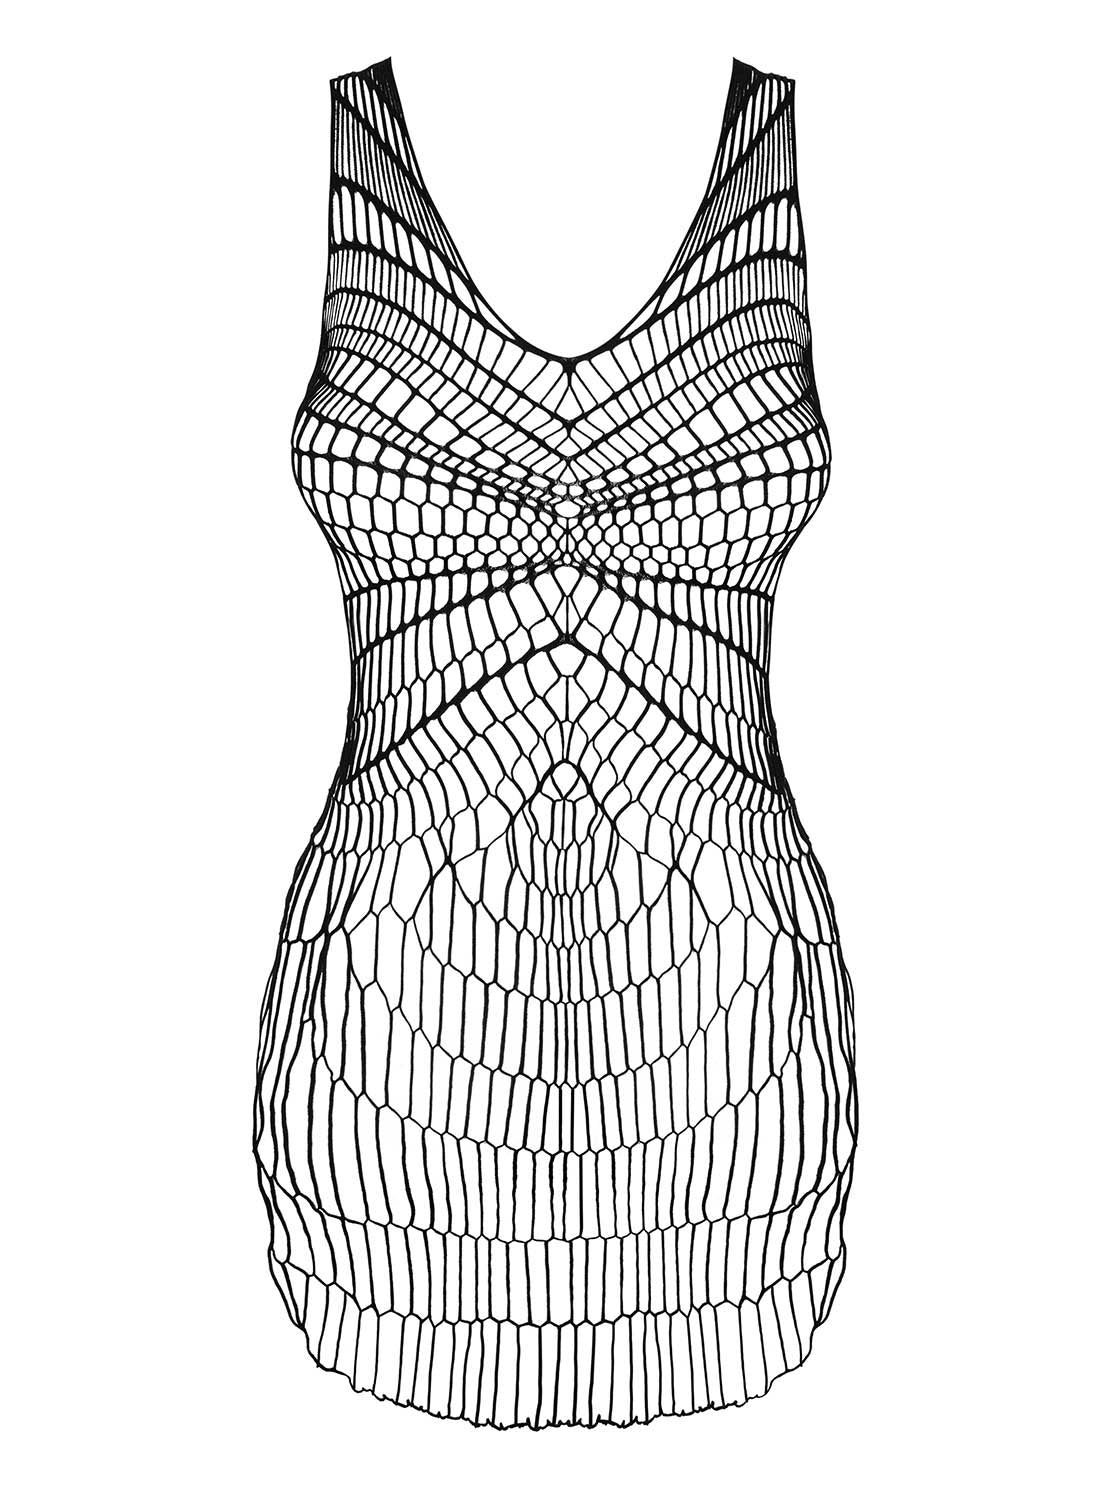 Knitted black mesh dress made of coarse-meshed and stretch material with geometric pattern